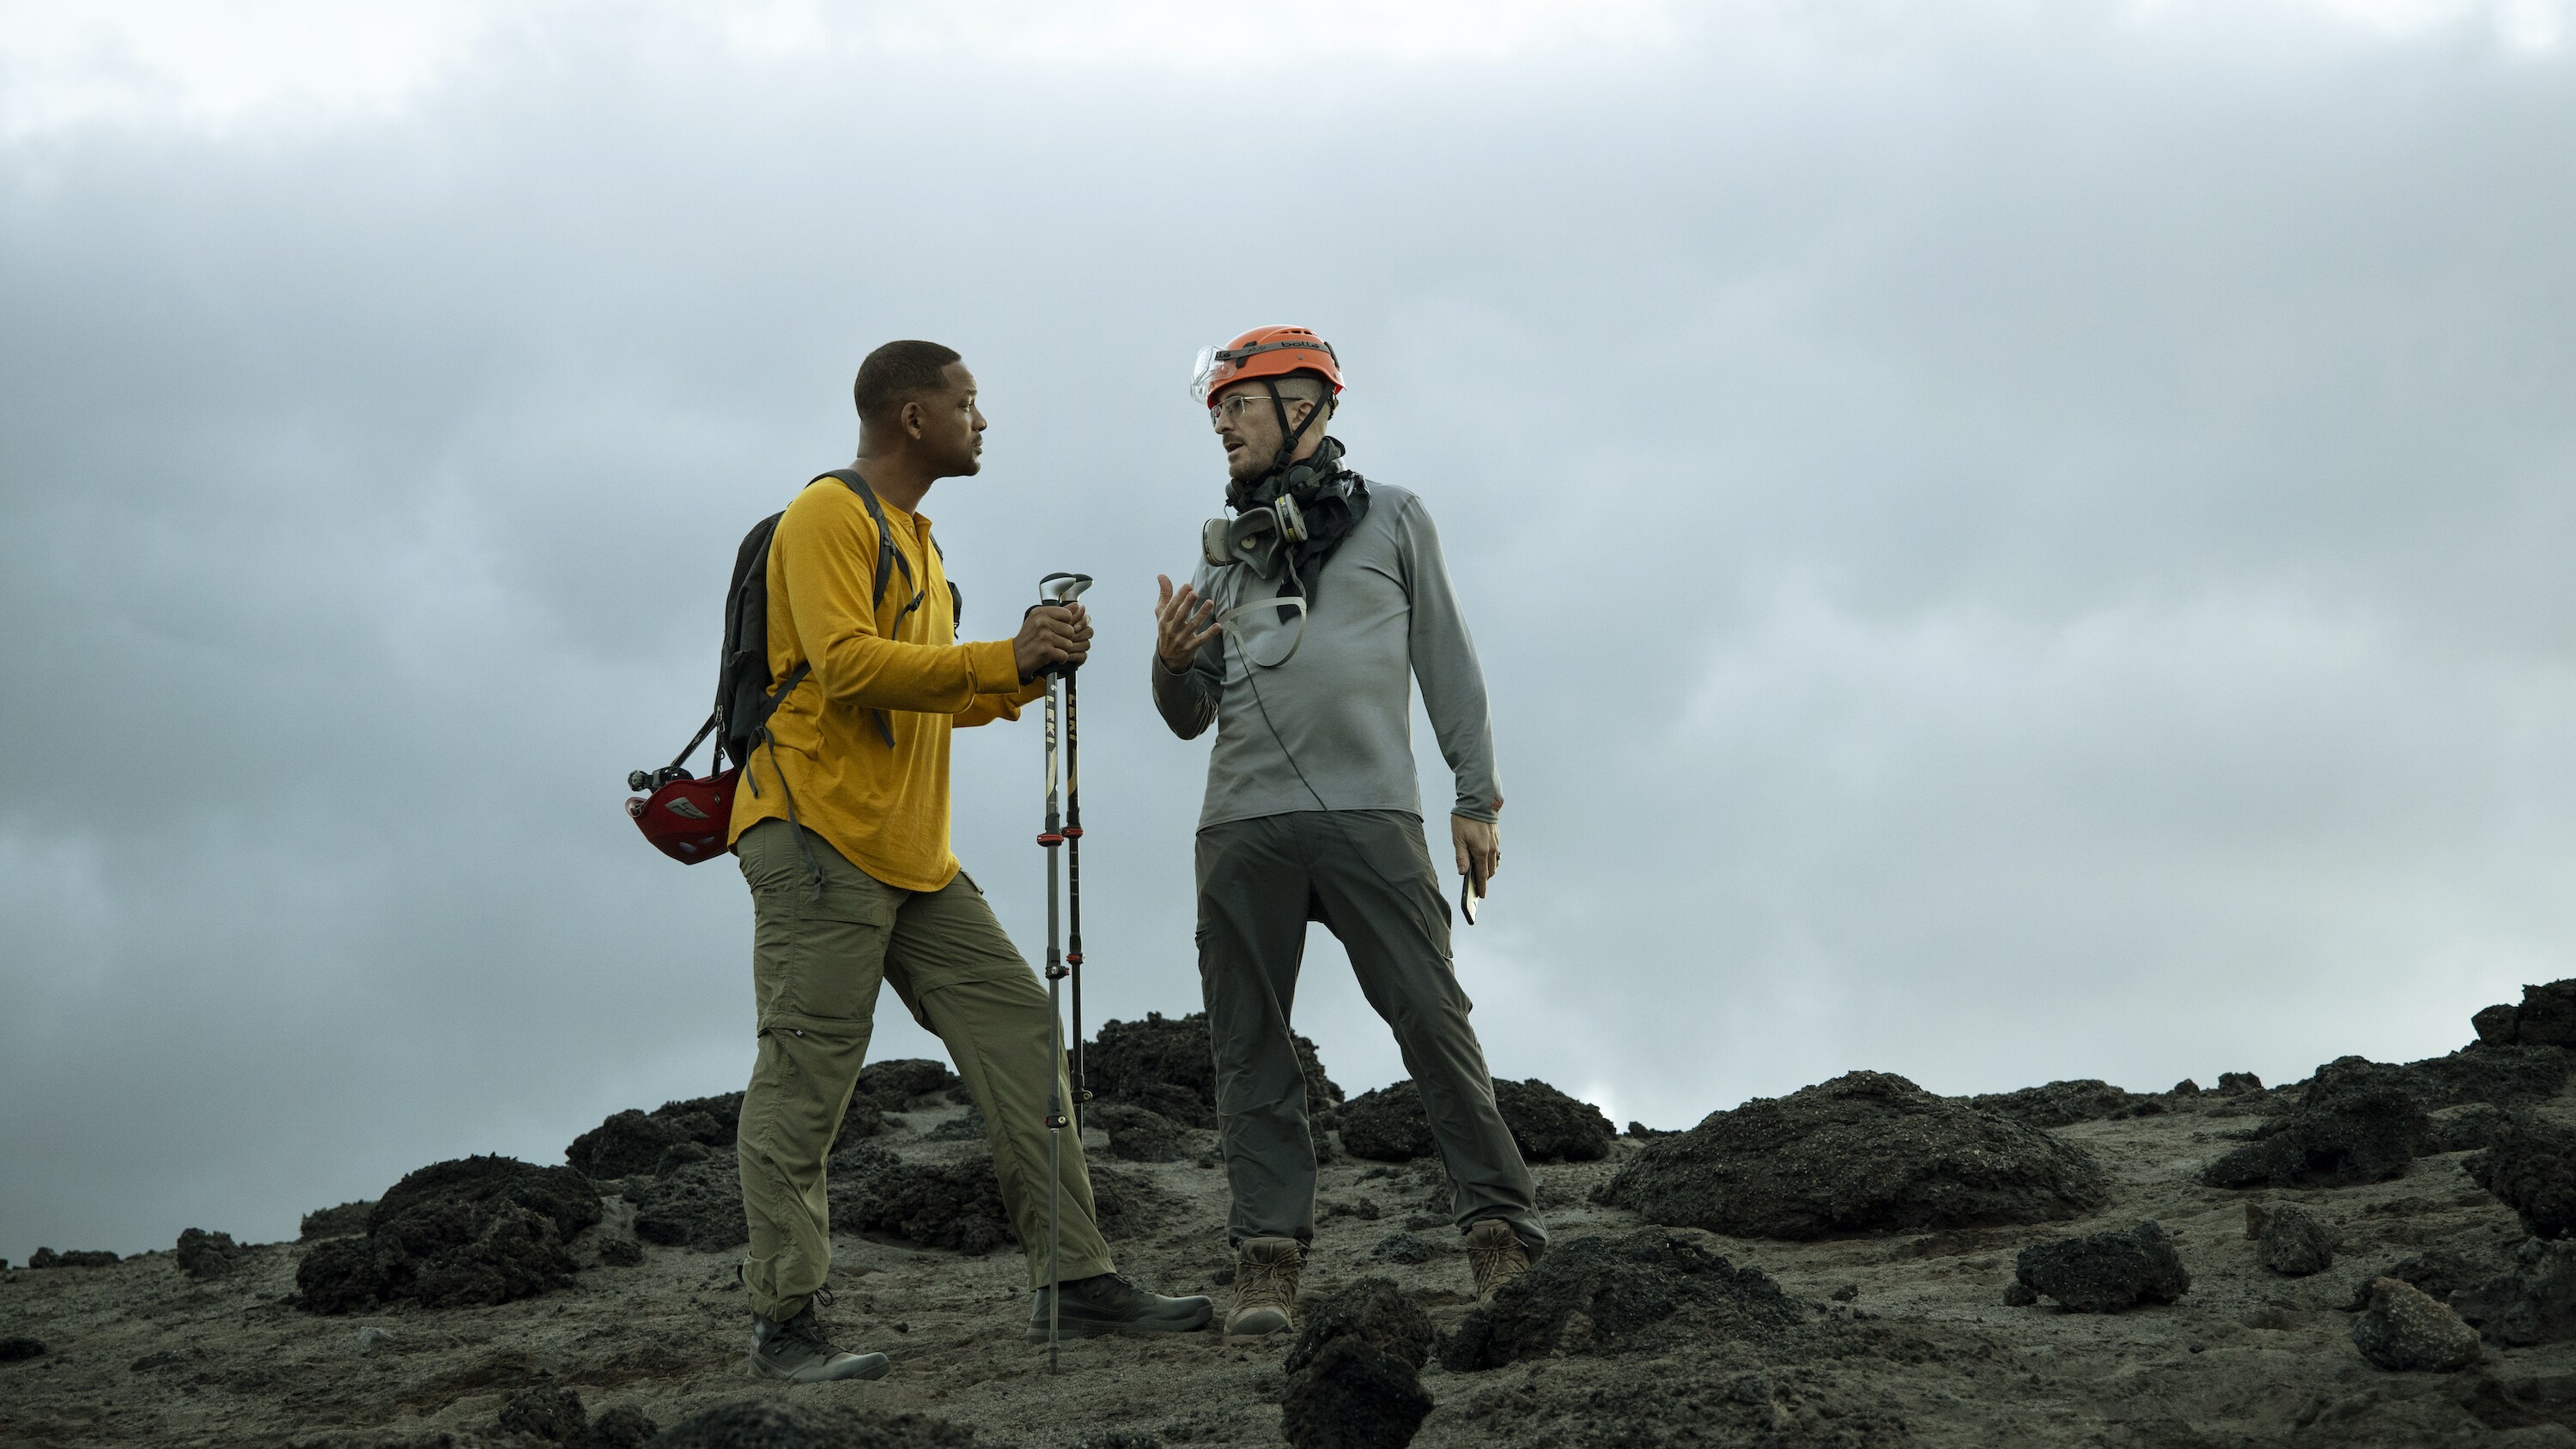 Will Smith, left, and Executive Producer Darren Aronofsky during production of Welcome to Earth where Will descends into a volcano to install sensors. (National Geographic for Disney+/Kyle Christy)